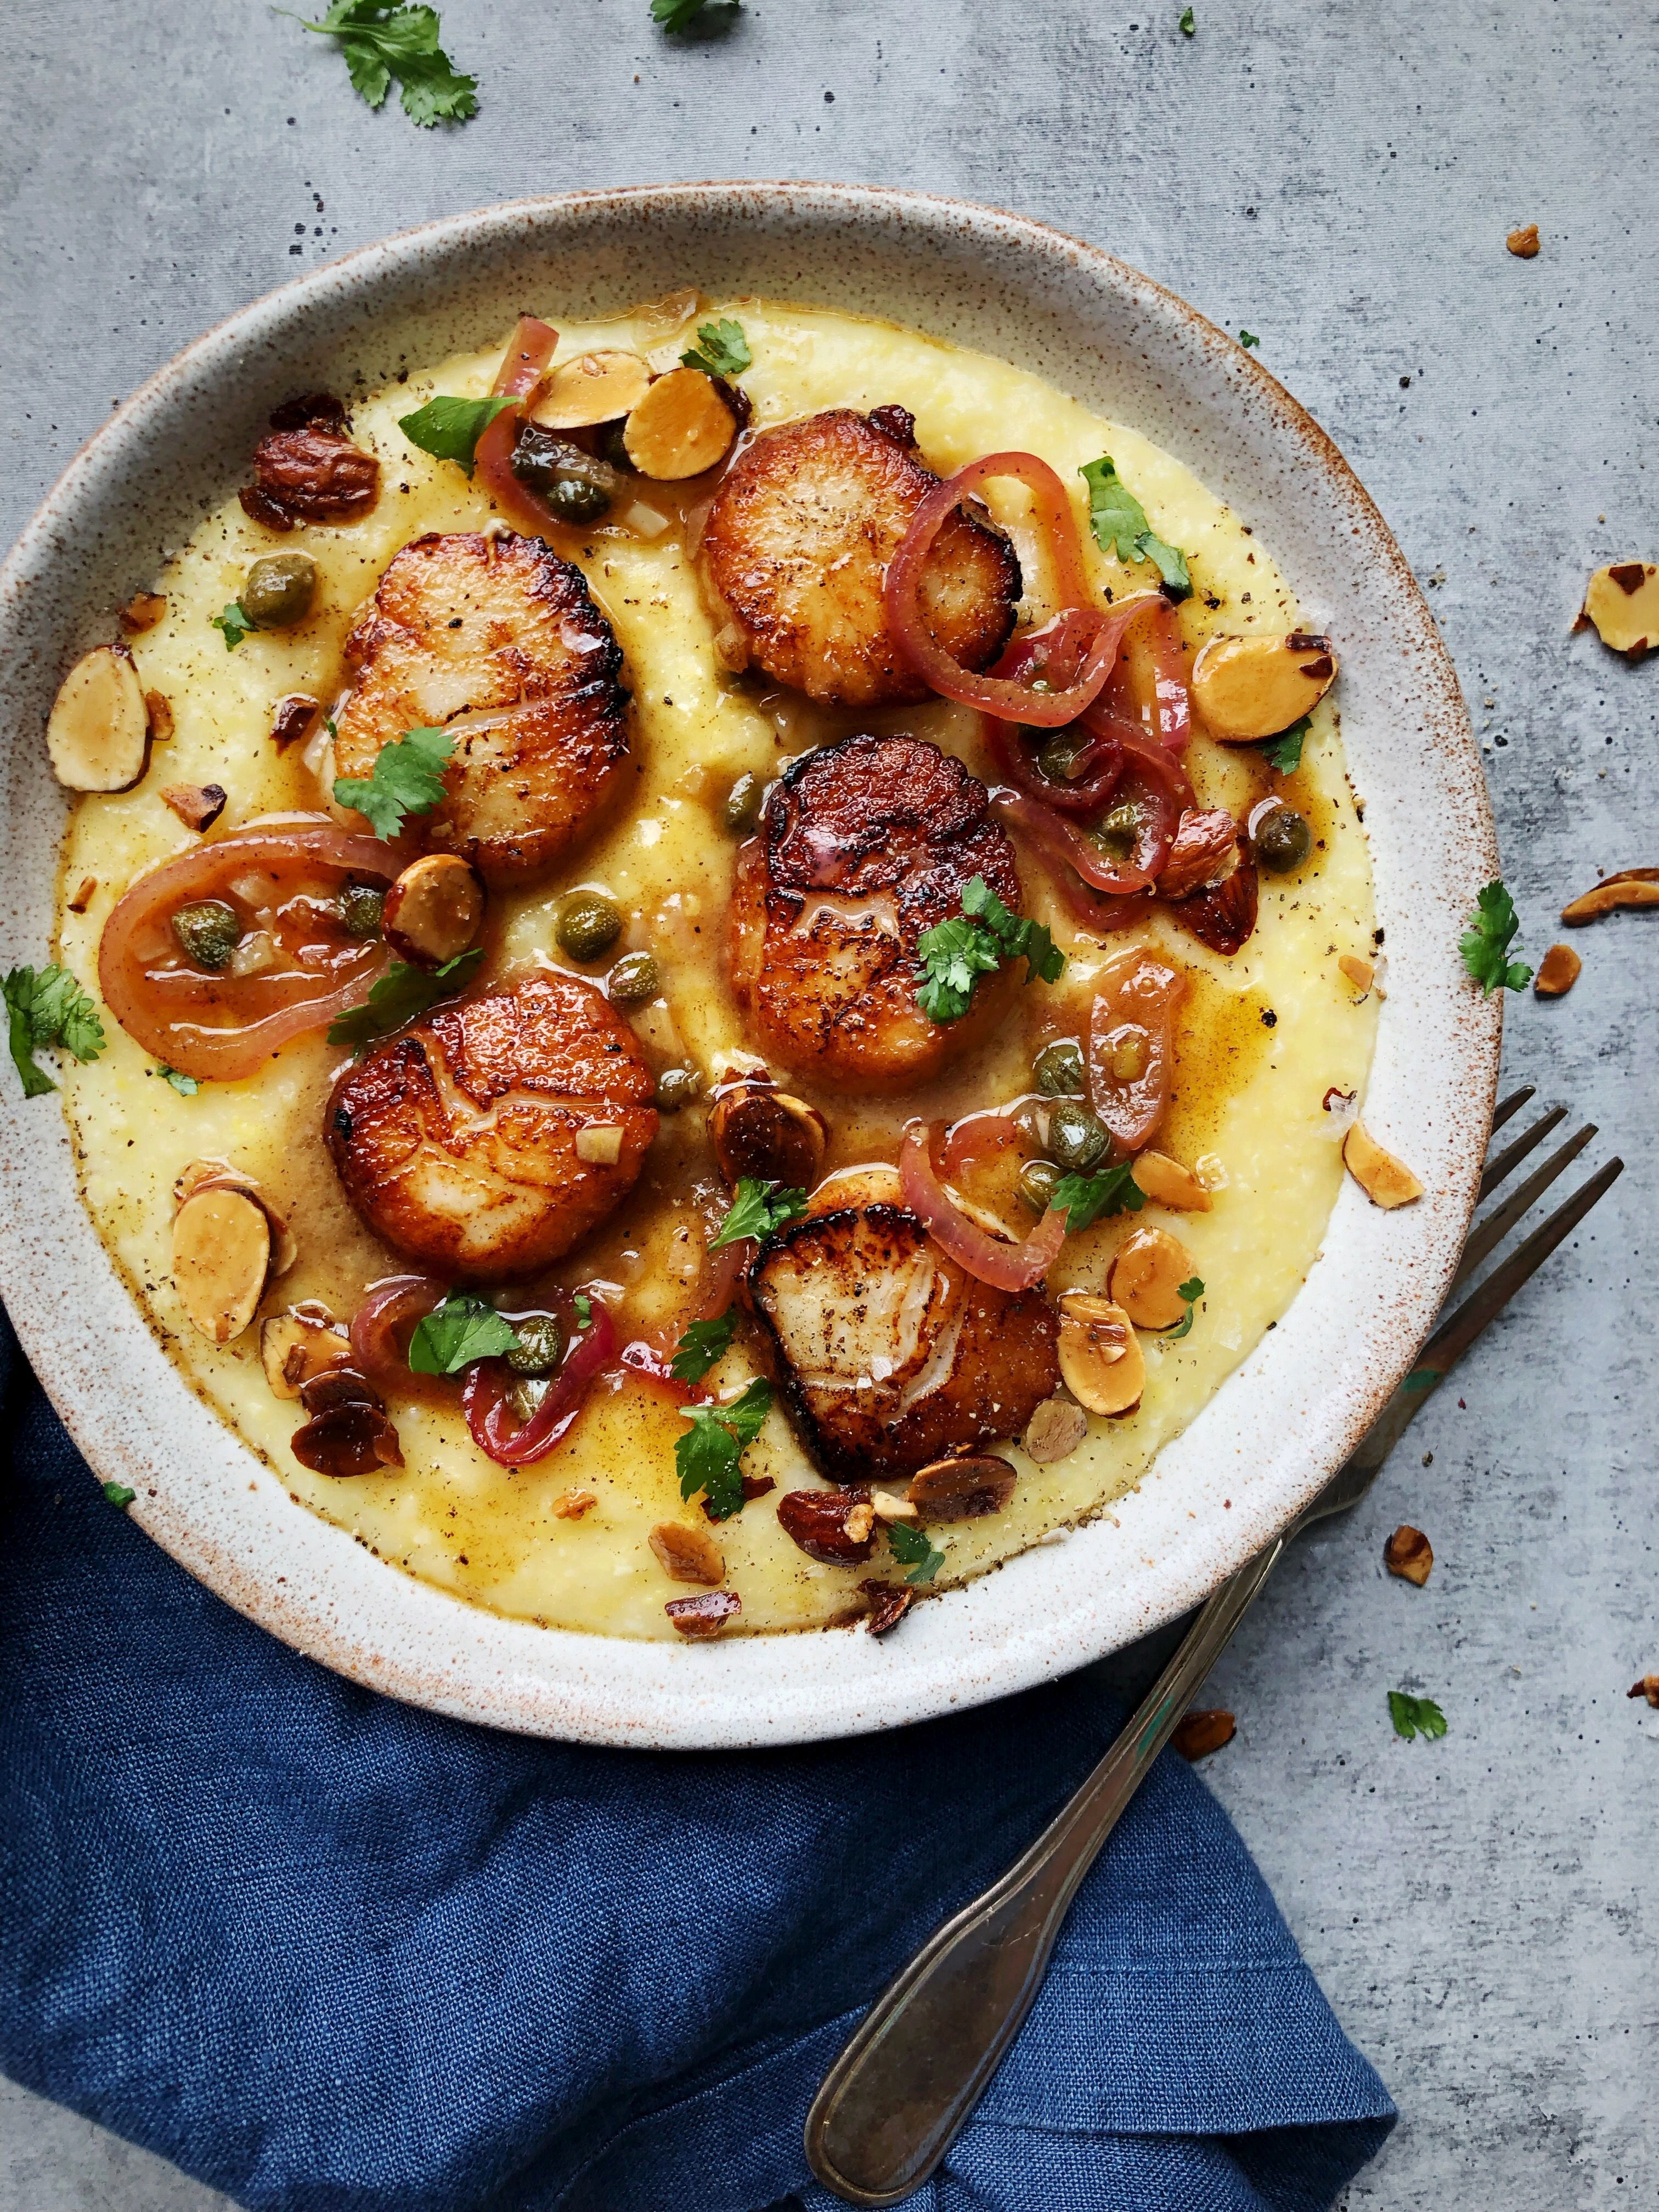 Scallops with Almond Brown Butter and Parmesan Polenta